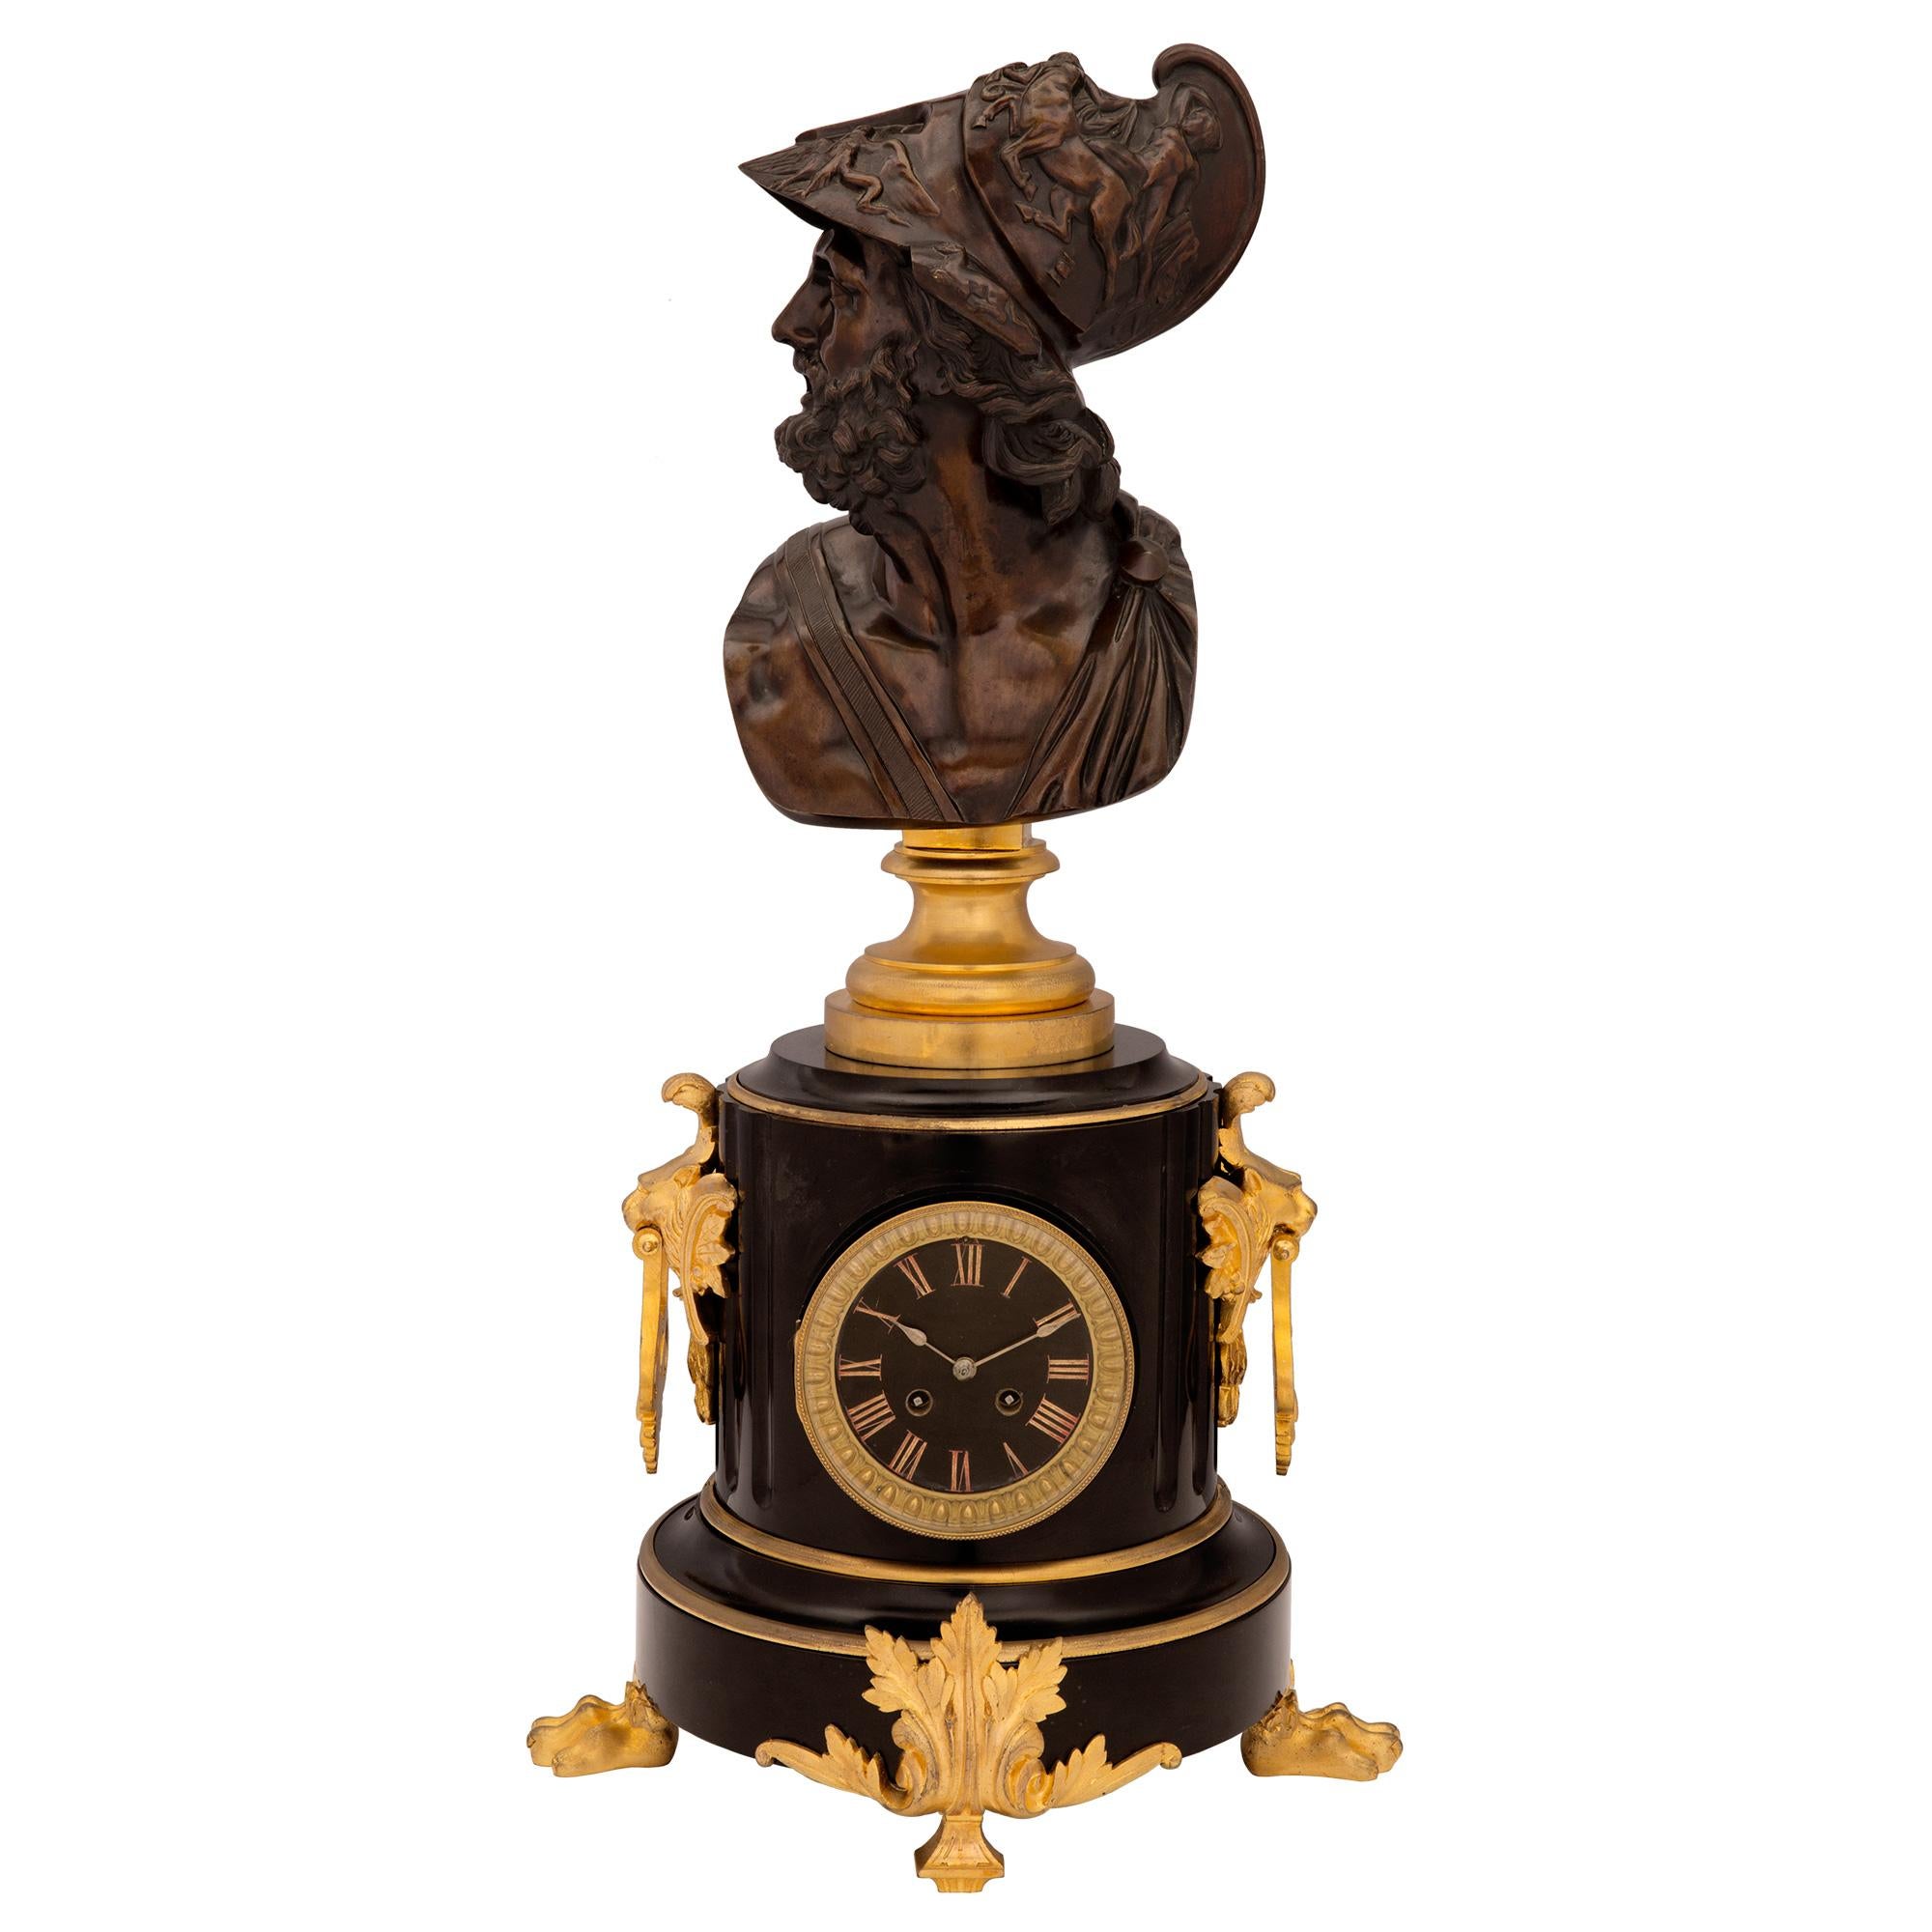 A handsome and high quality French 19th century Napoleon III period black Belgian marble, ormolu and patinated bronze garniture set. The three piece set displays two outer tazzas and a central clock with an impressive bust on top. Each patinated